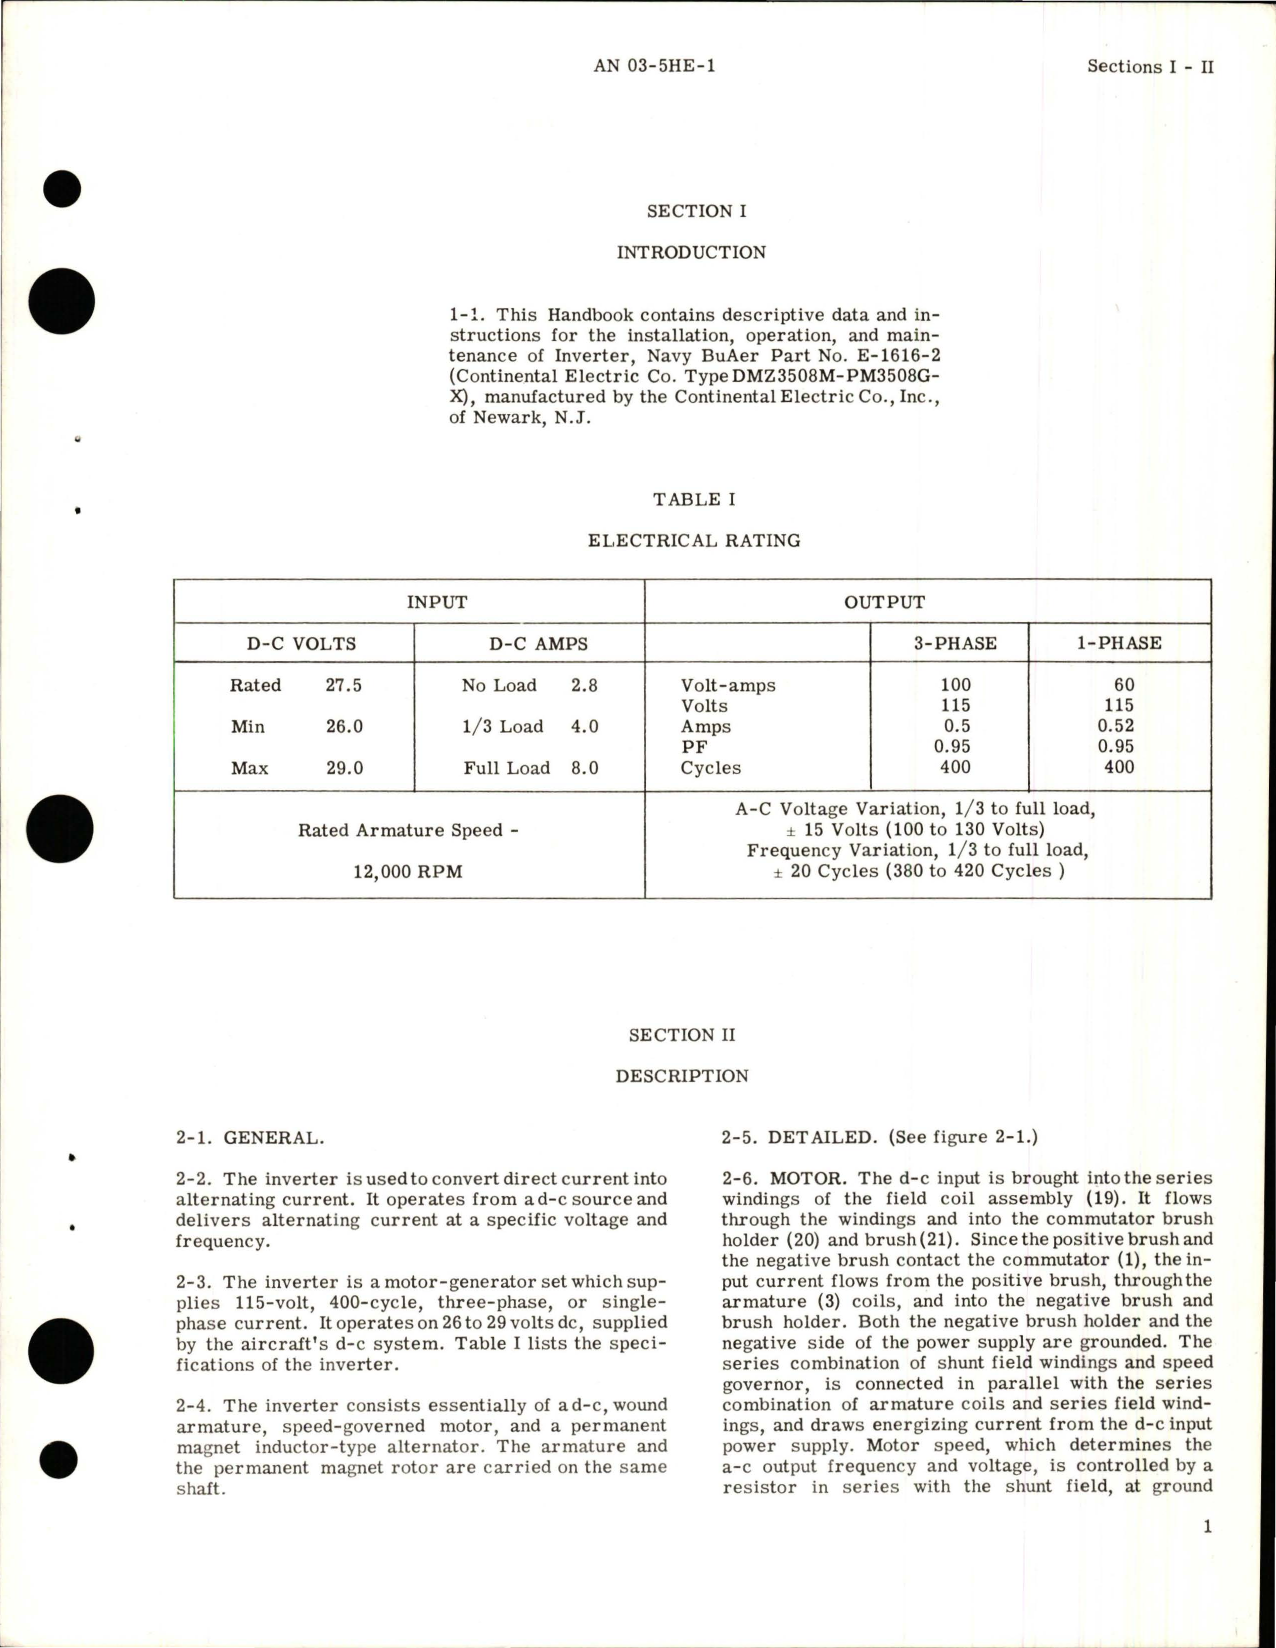 Sample page 5 from AirCorps Library document: Operation and Service Instructions for Inverter - Type DMZ3508M-PM3508G-X